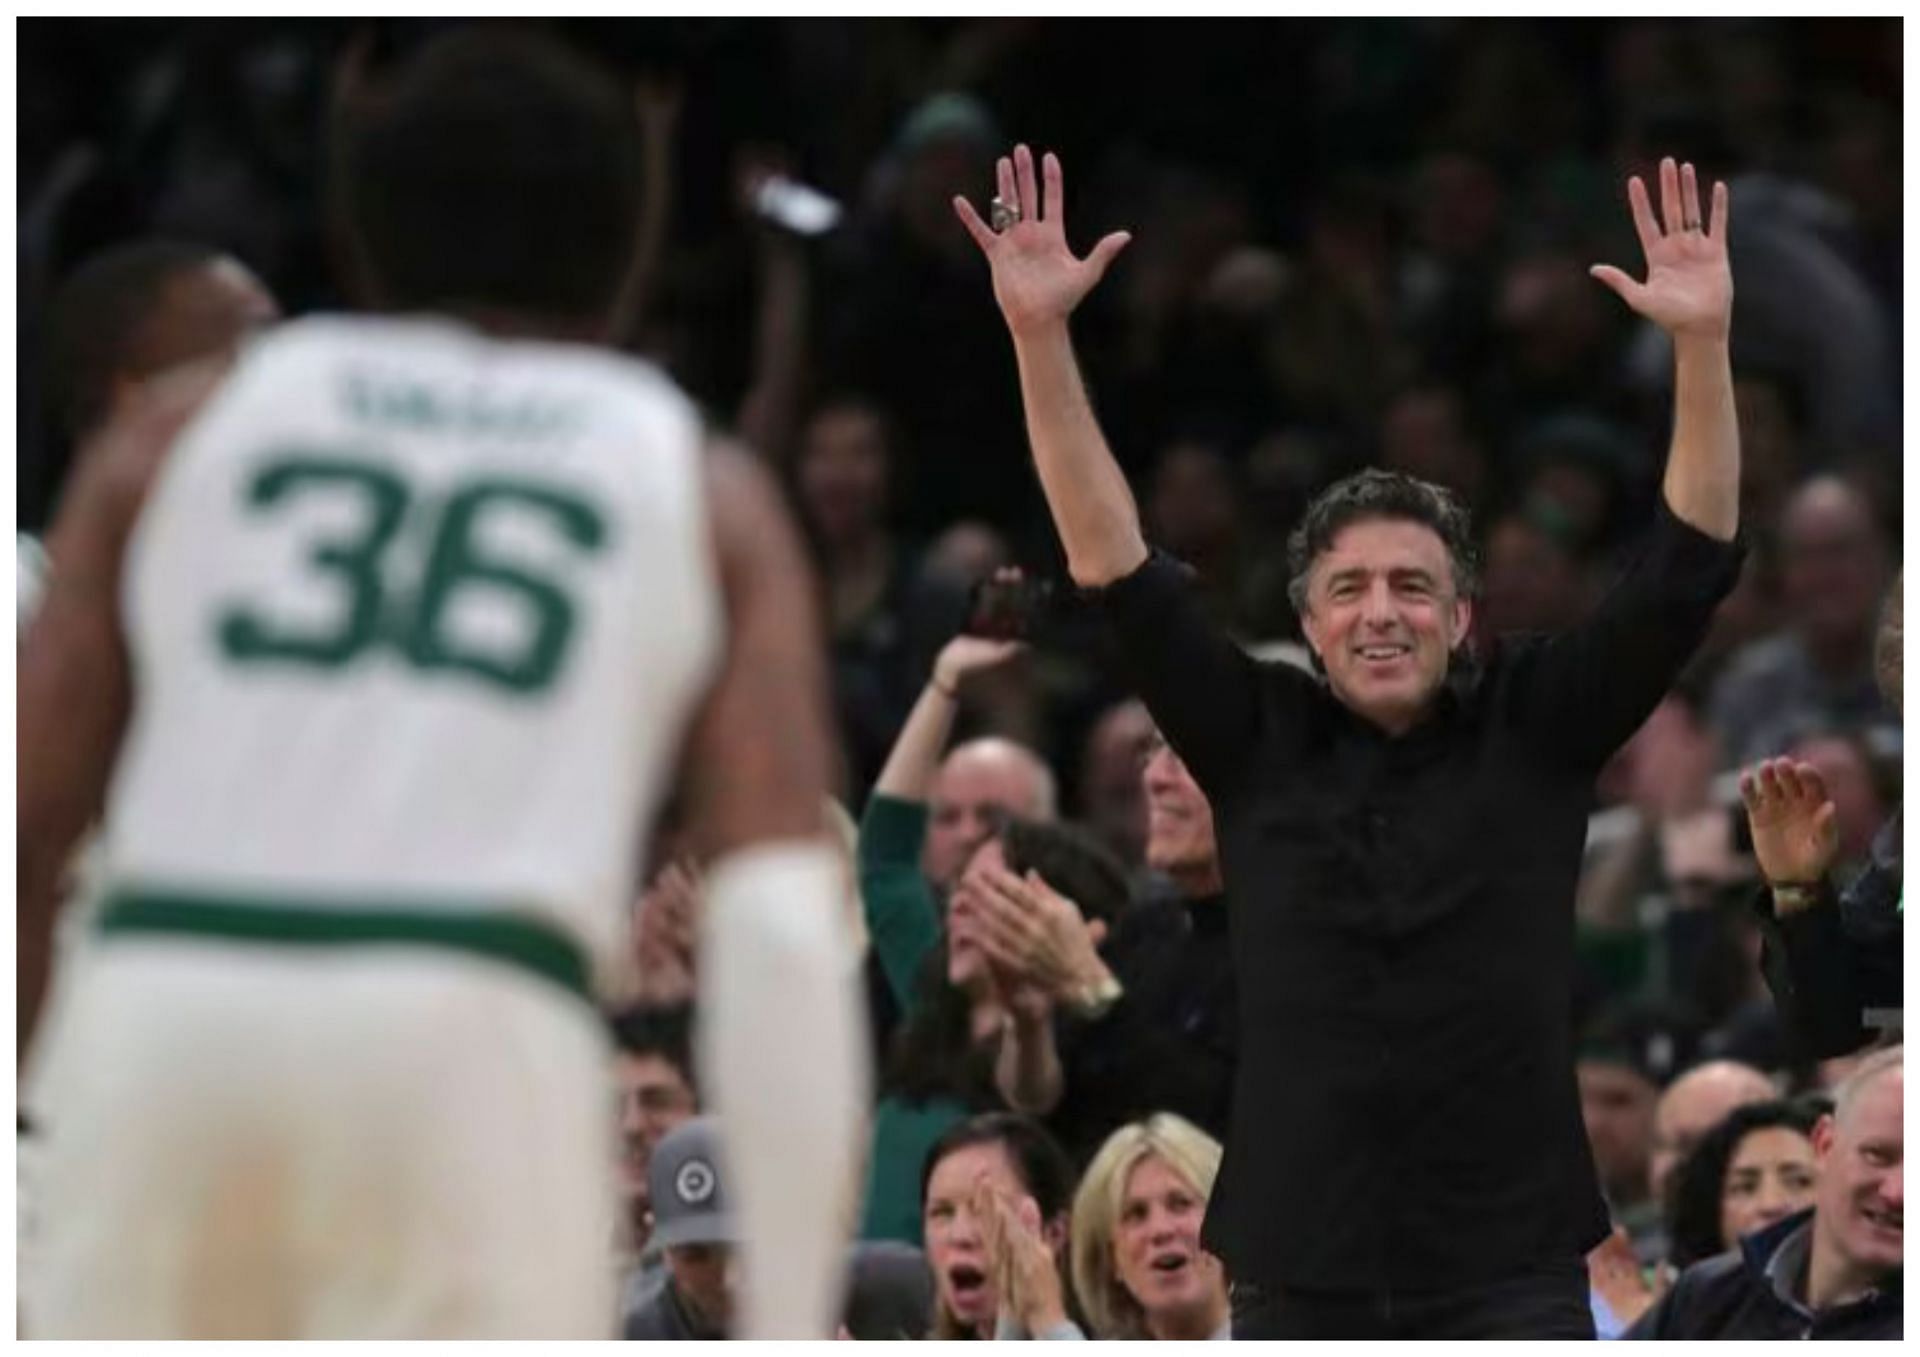 Wyc Grousbeck is the owner of the Boston Celtics (AP Photo/Charles Krupa)